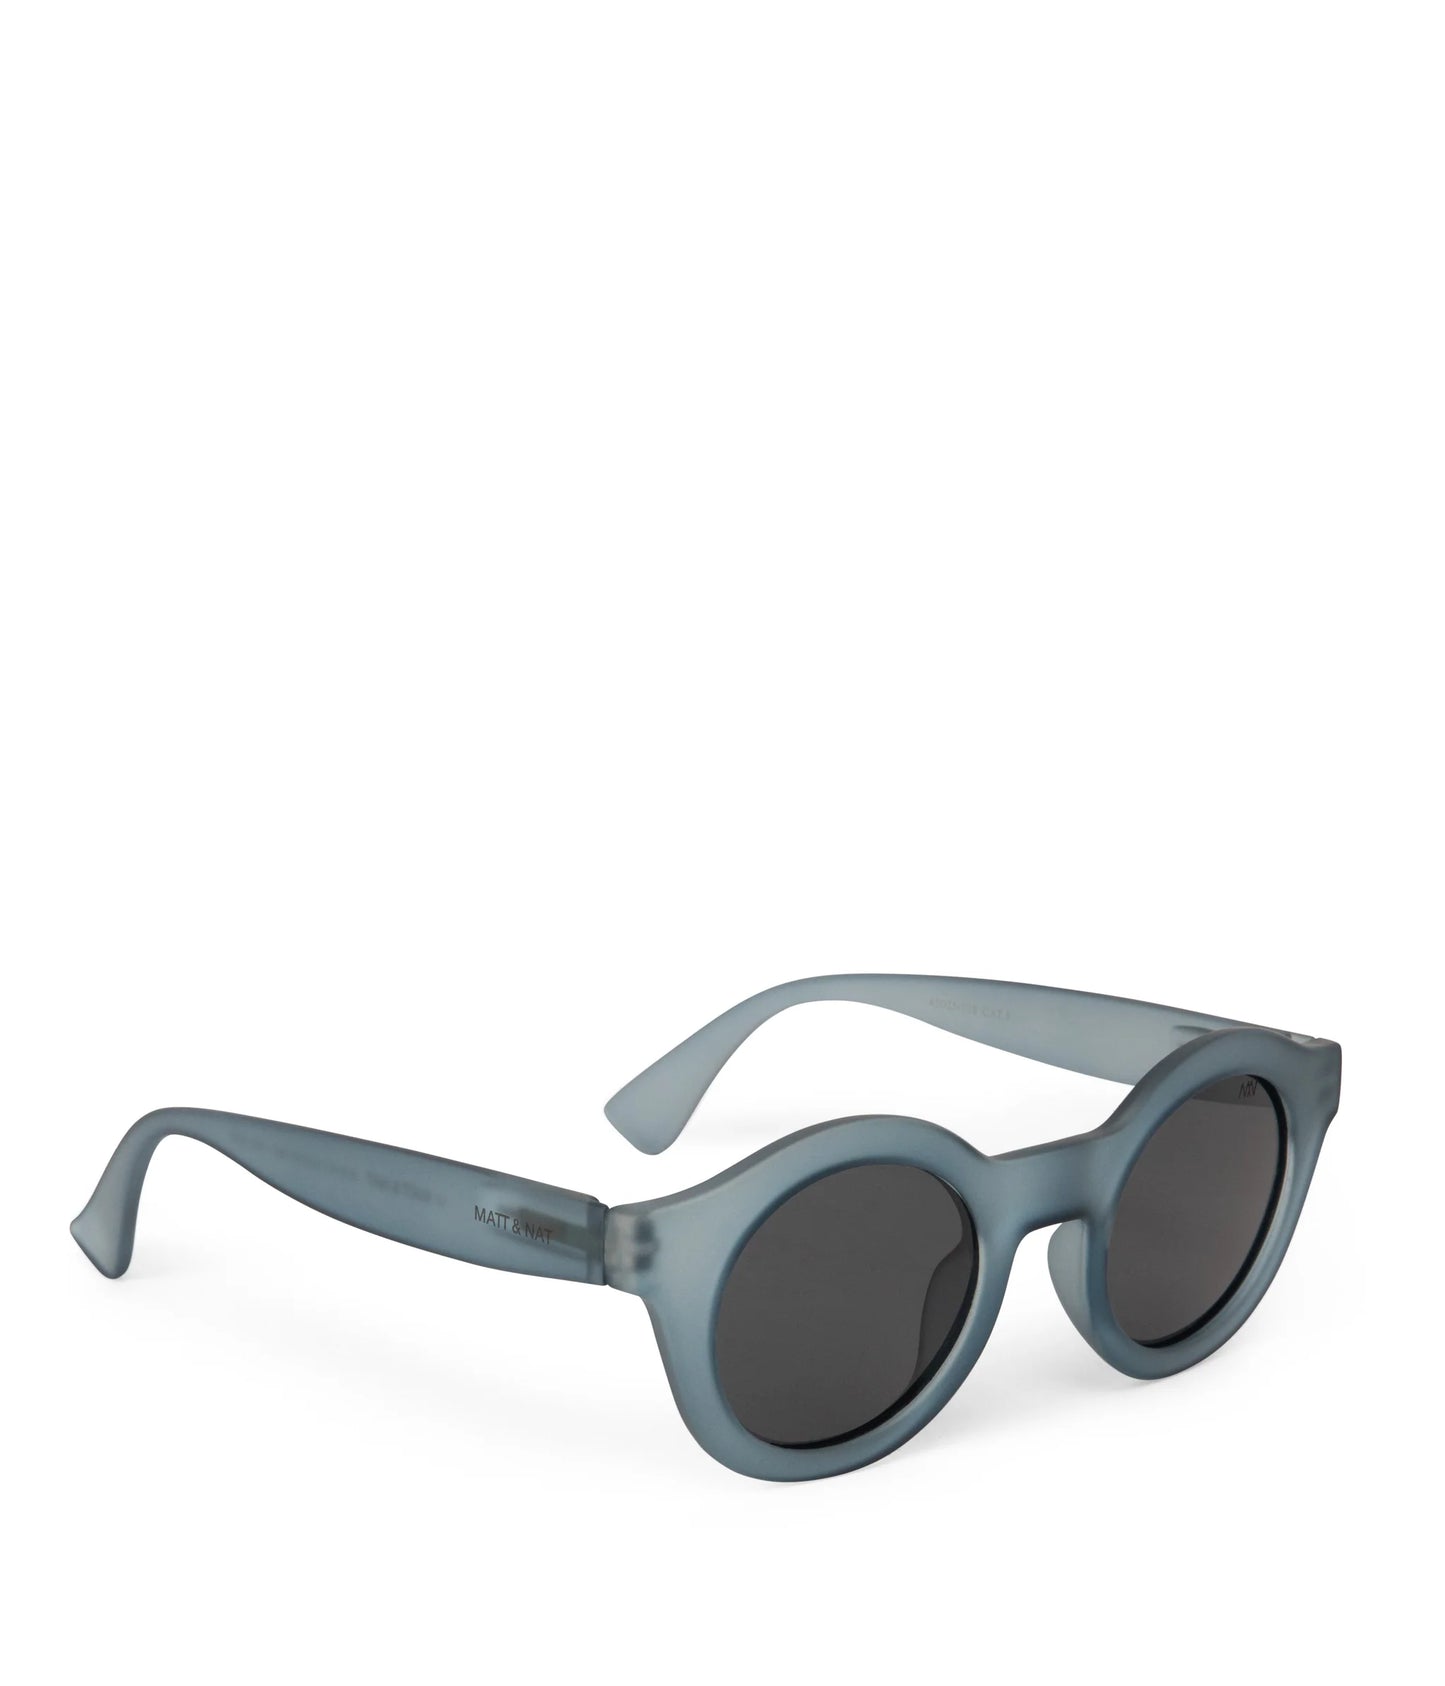 Surie-2 Recycled Sunglasses in Sky with Case